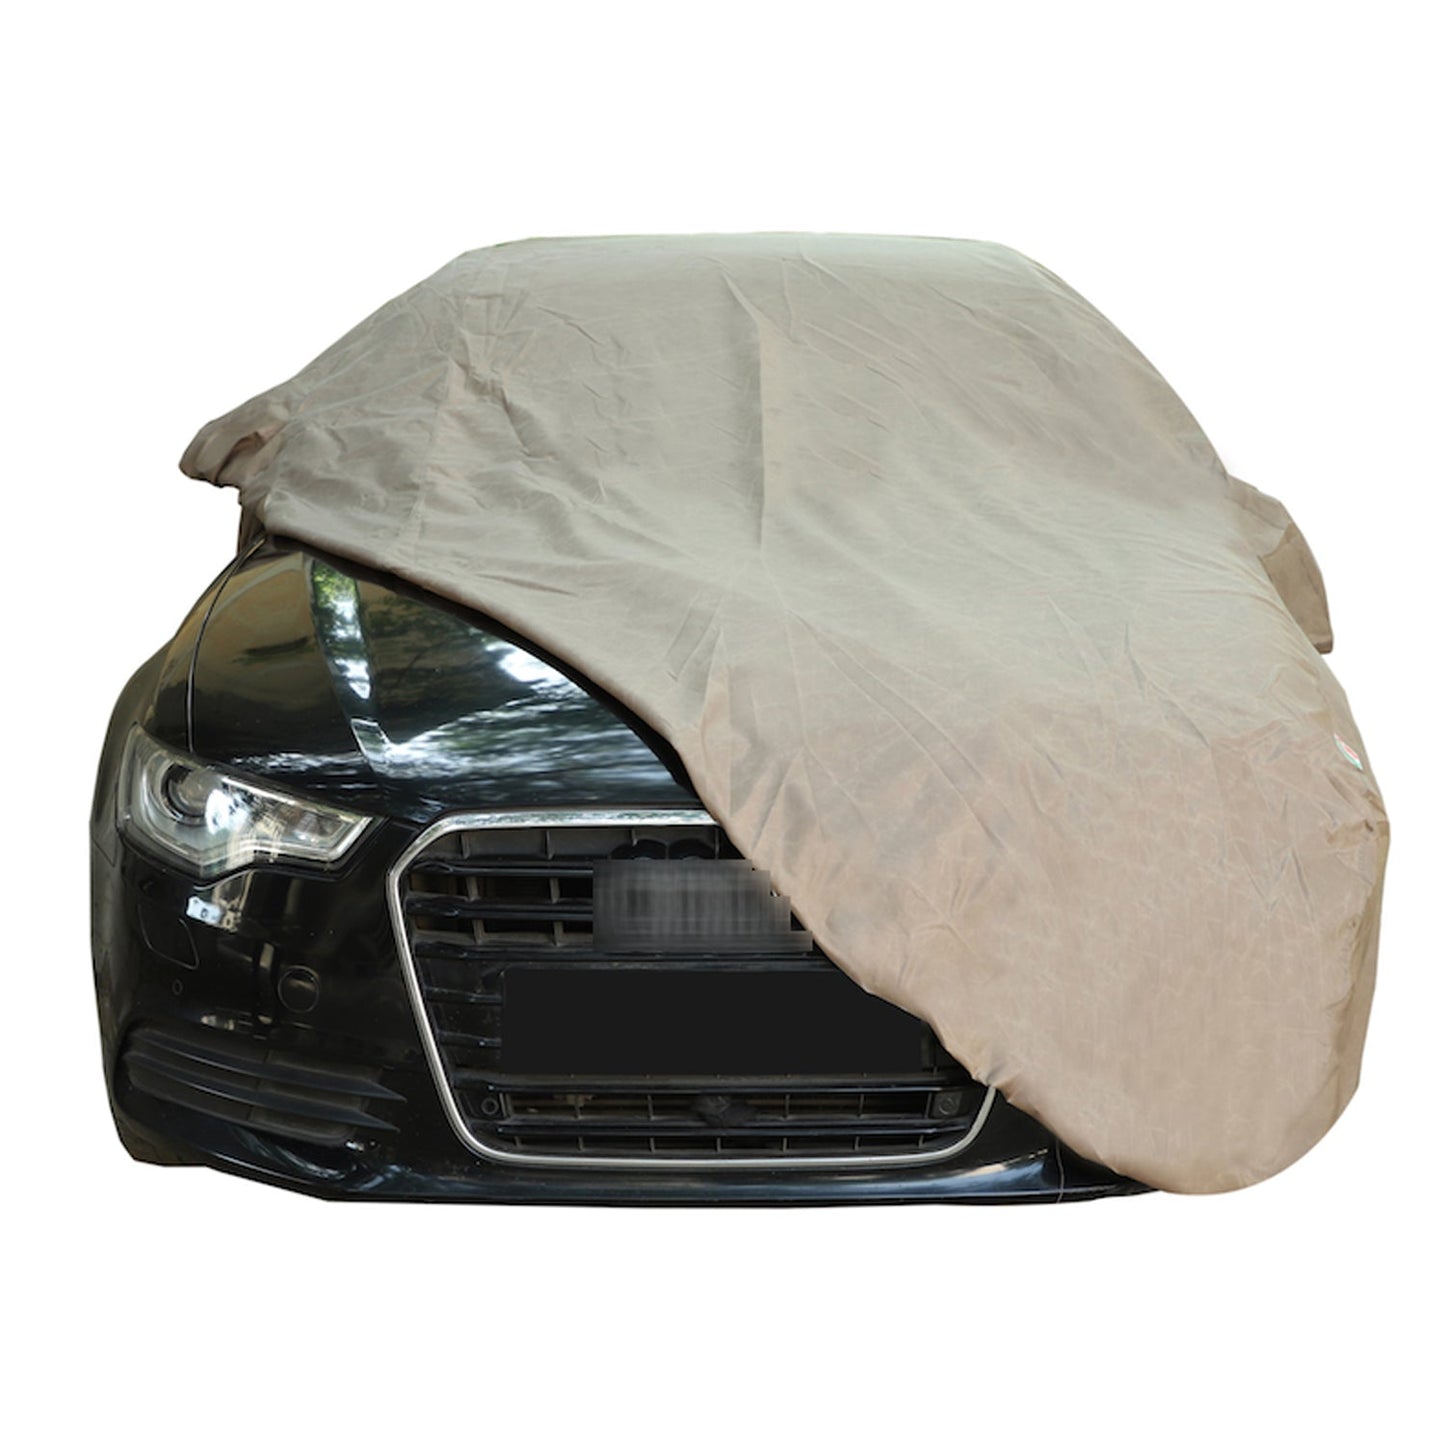 Oshotto Brown 100% Waterproof Car Body Cover with Mirror Pockets For BMW 6 Series